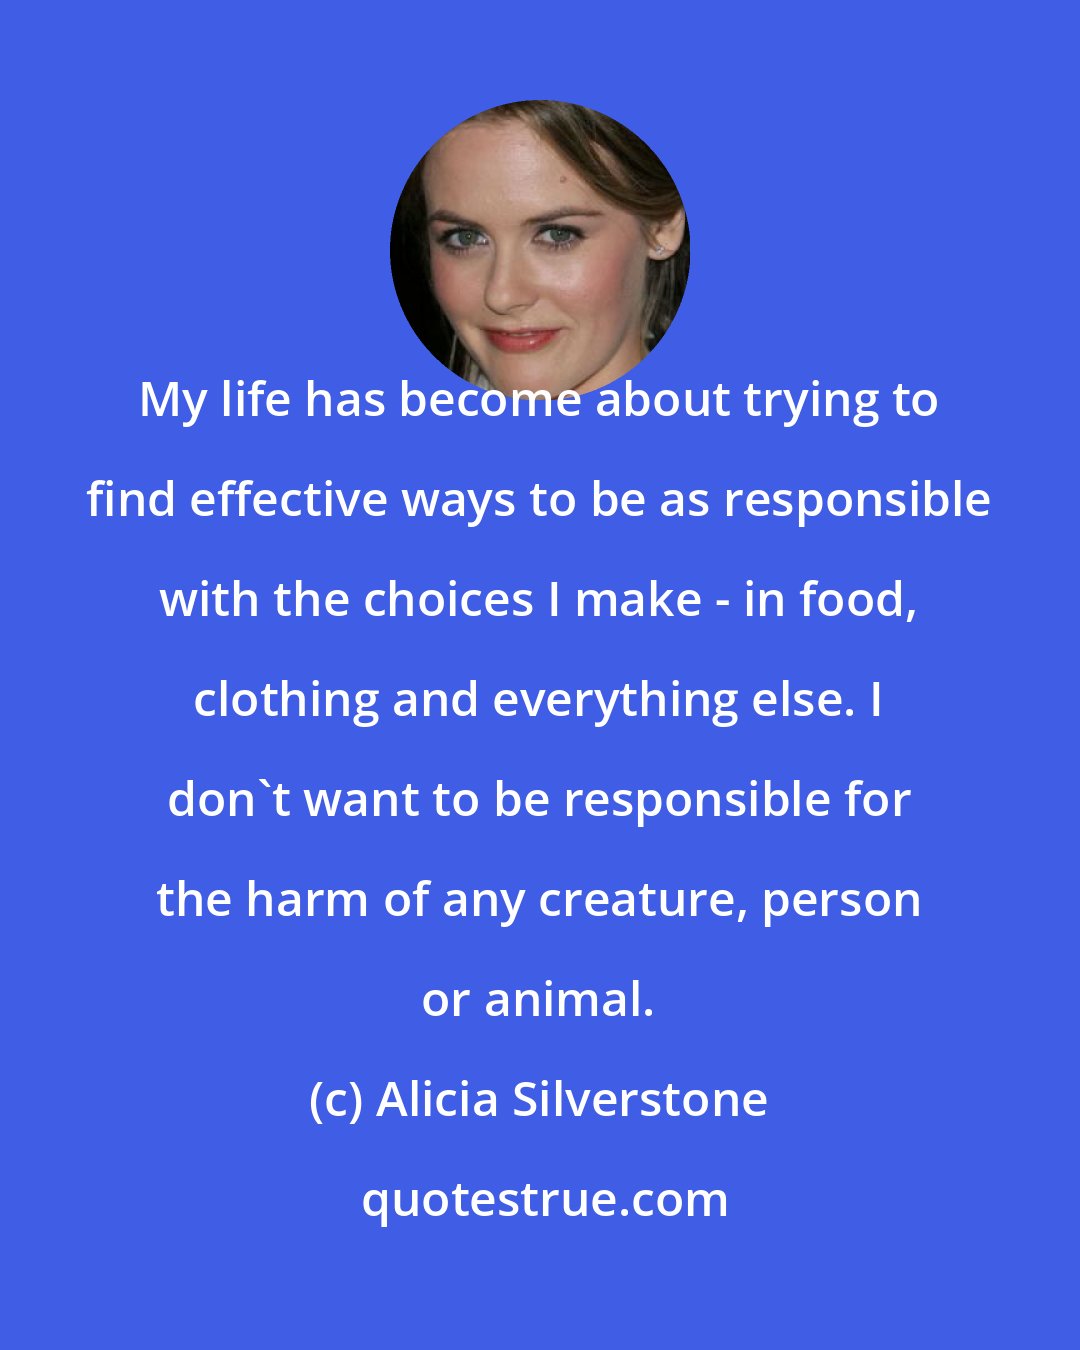 Alicia Silverstone: My life has become about trying to find effective ways to be as responsible with the choices I make - in food, clothing and everything else. I don't want to be responsible for the harm of any creature, person or animal.